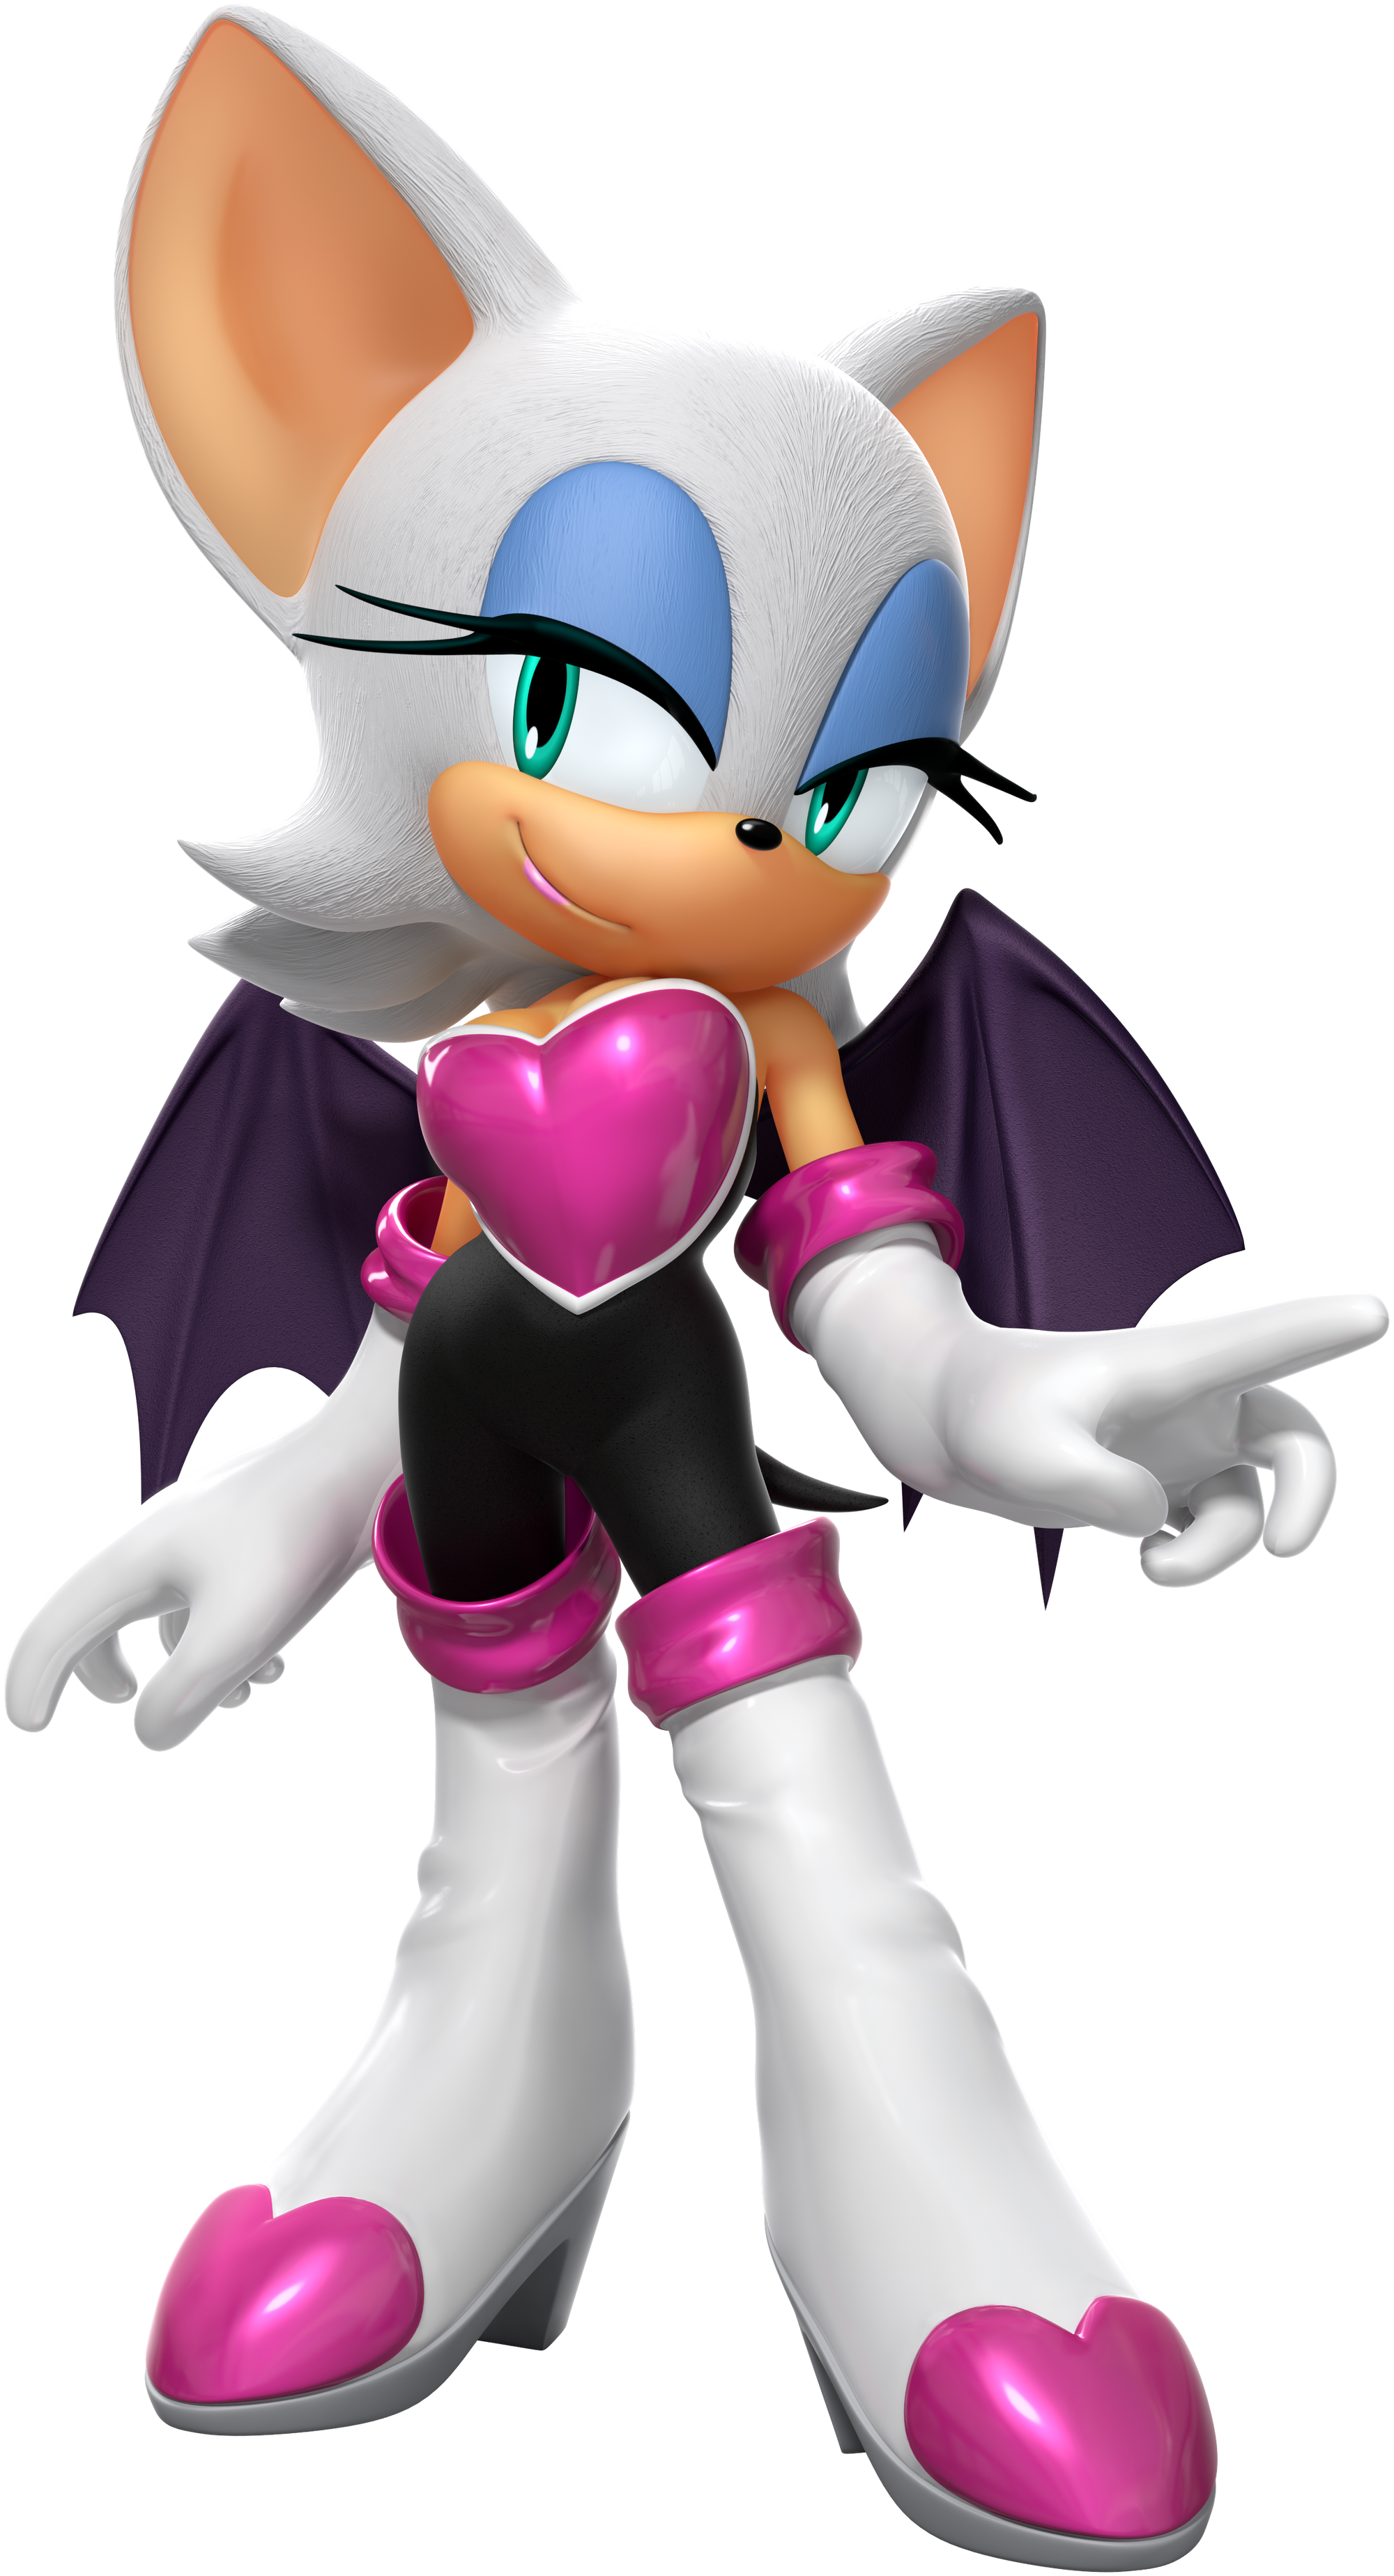 Rouge the Bat | Sonic News Network | FANDOM powered by Wikia